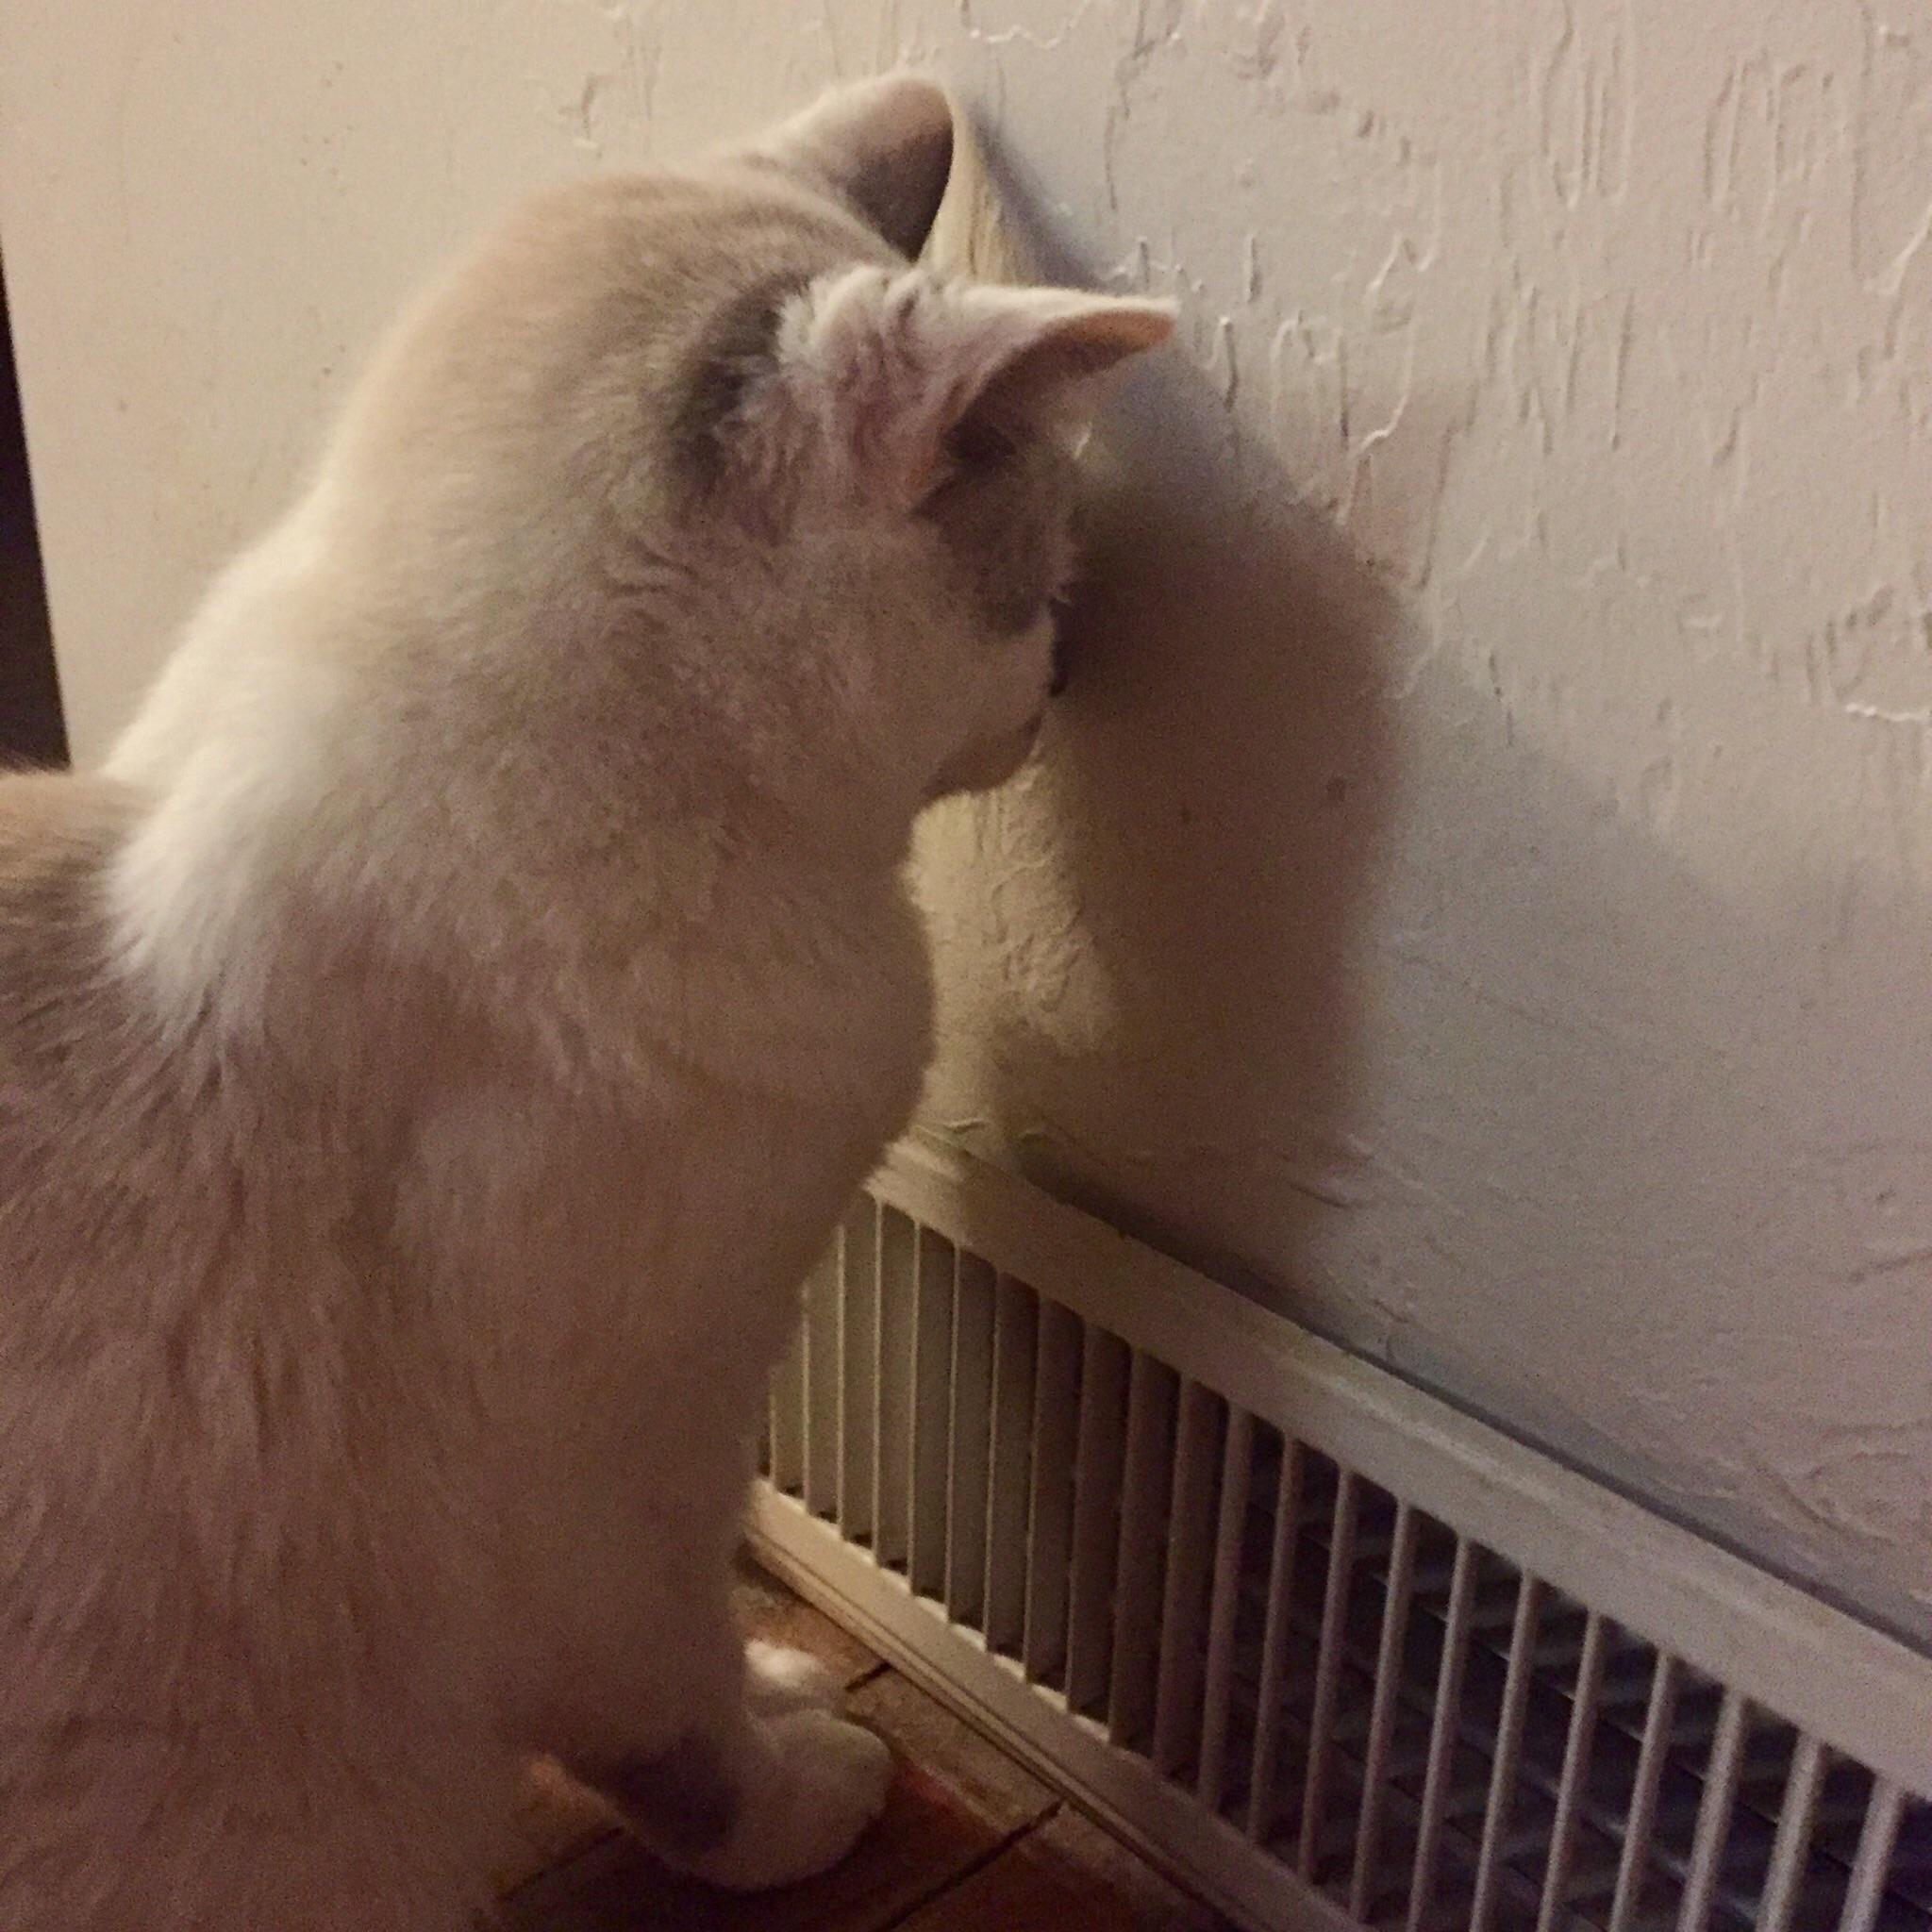 She's blind, it's cold outside, and the heater is on.